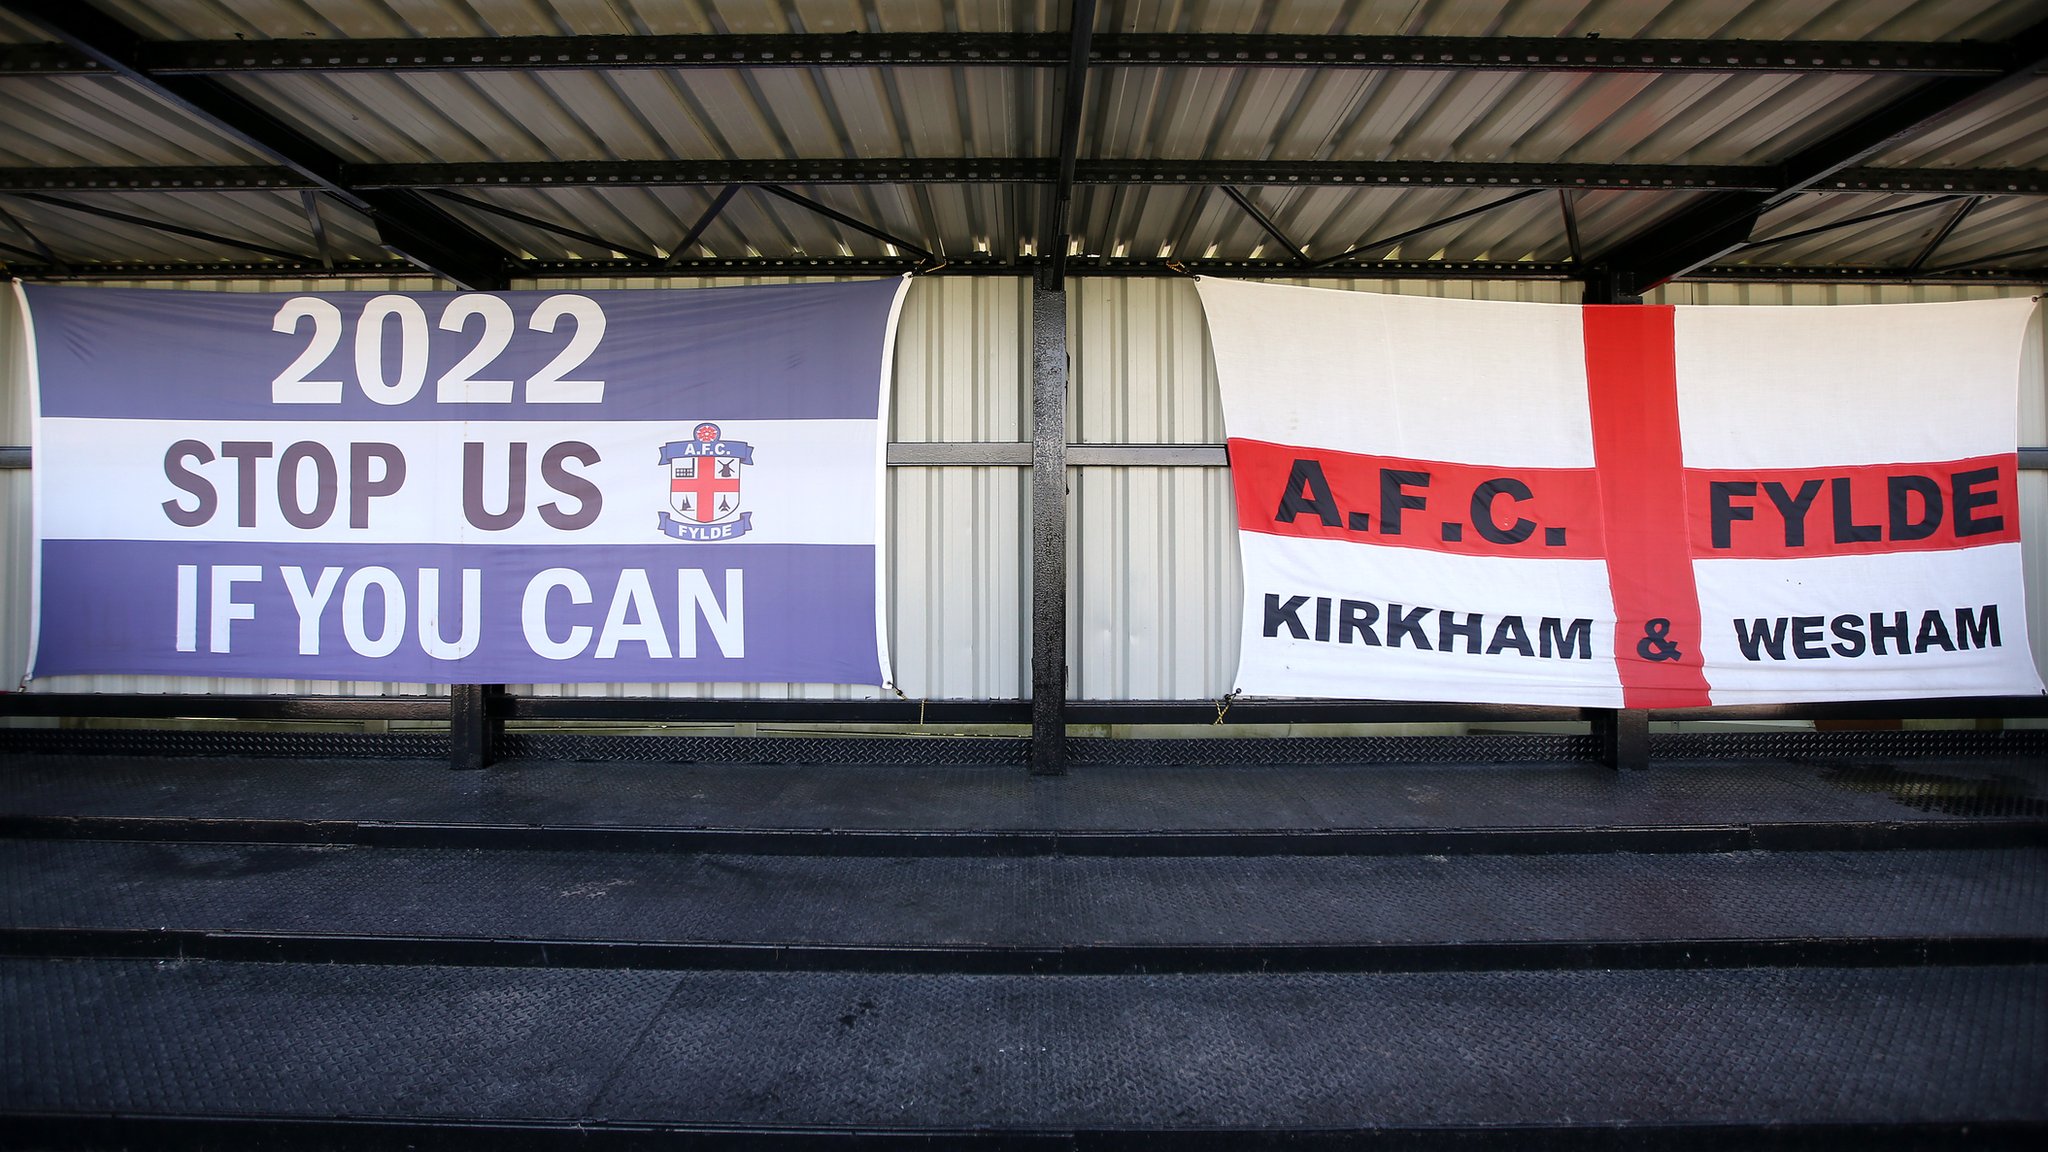 'Stop us if you can' - the rise and rise of AFC Fylde